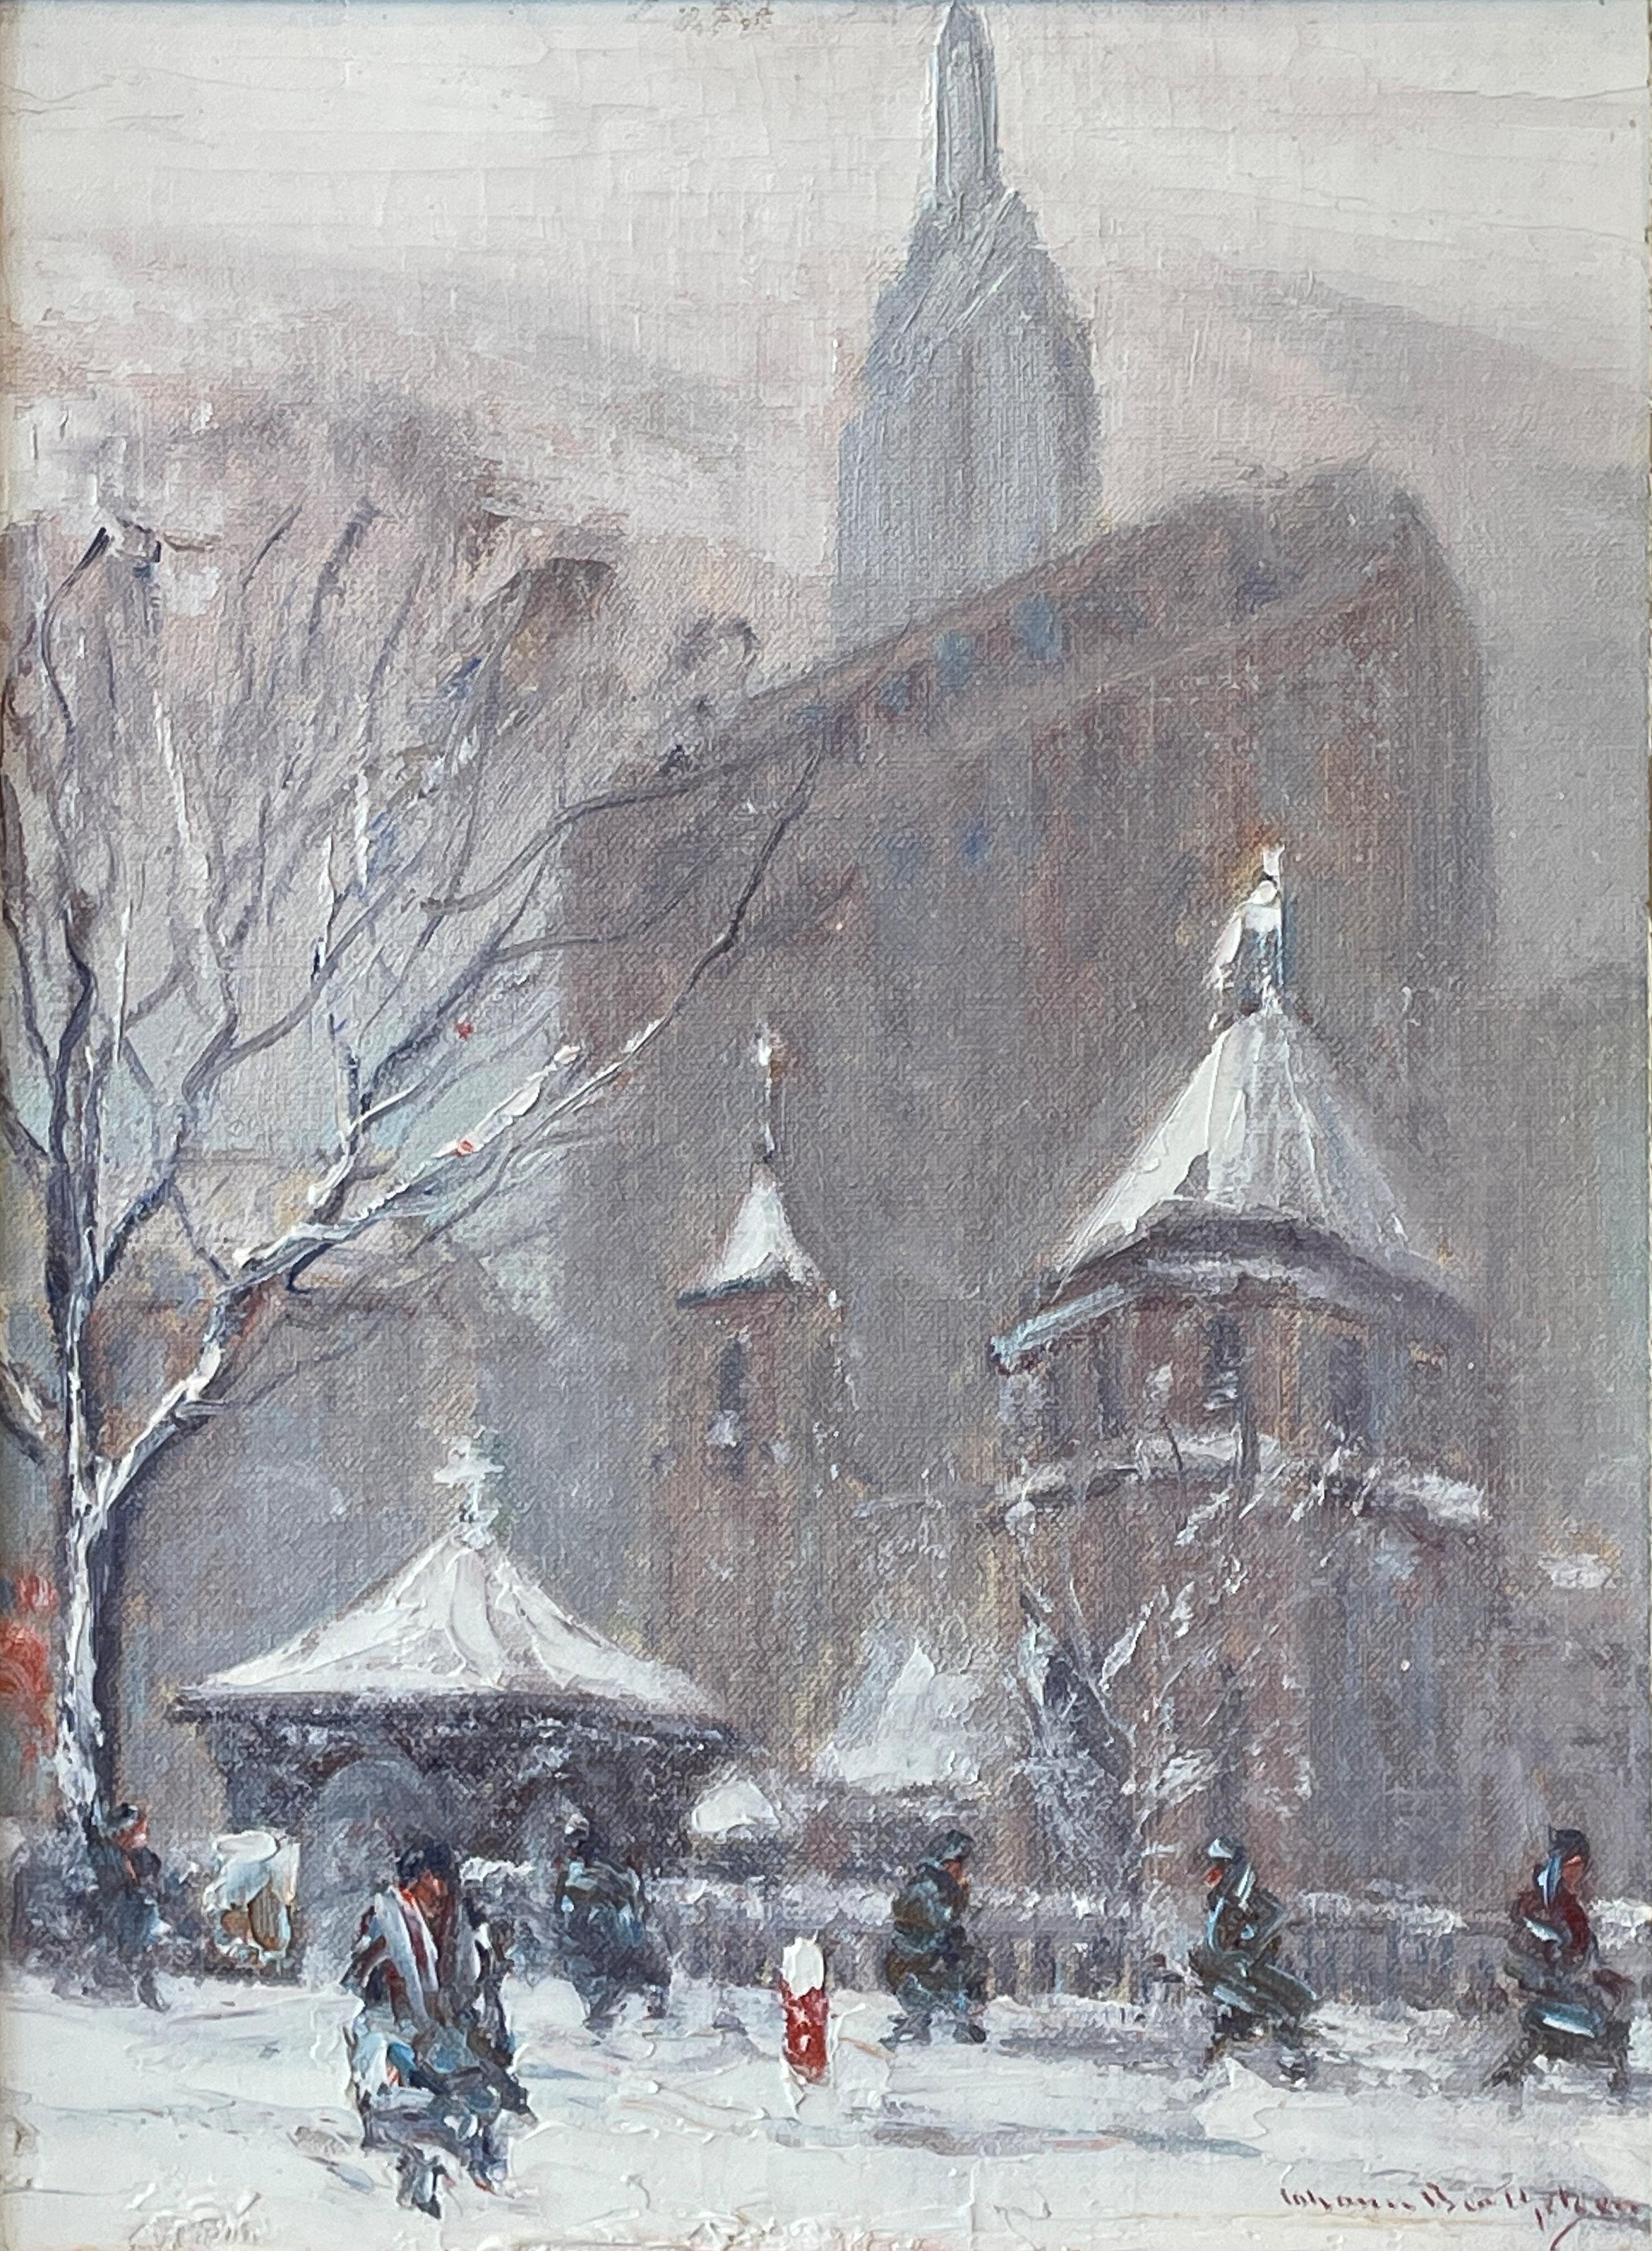 Johann Berthelsen
Little Church Around the Corner, circa 1950
Signed lower right
Oil on canvasboard
12 x 9 inches

Provenance:
Glasner Art Supply, New York
Lilac Gallery 
Private Collection, New Jersey (acquired directly from the above)

He was born